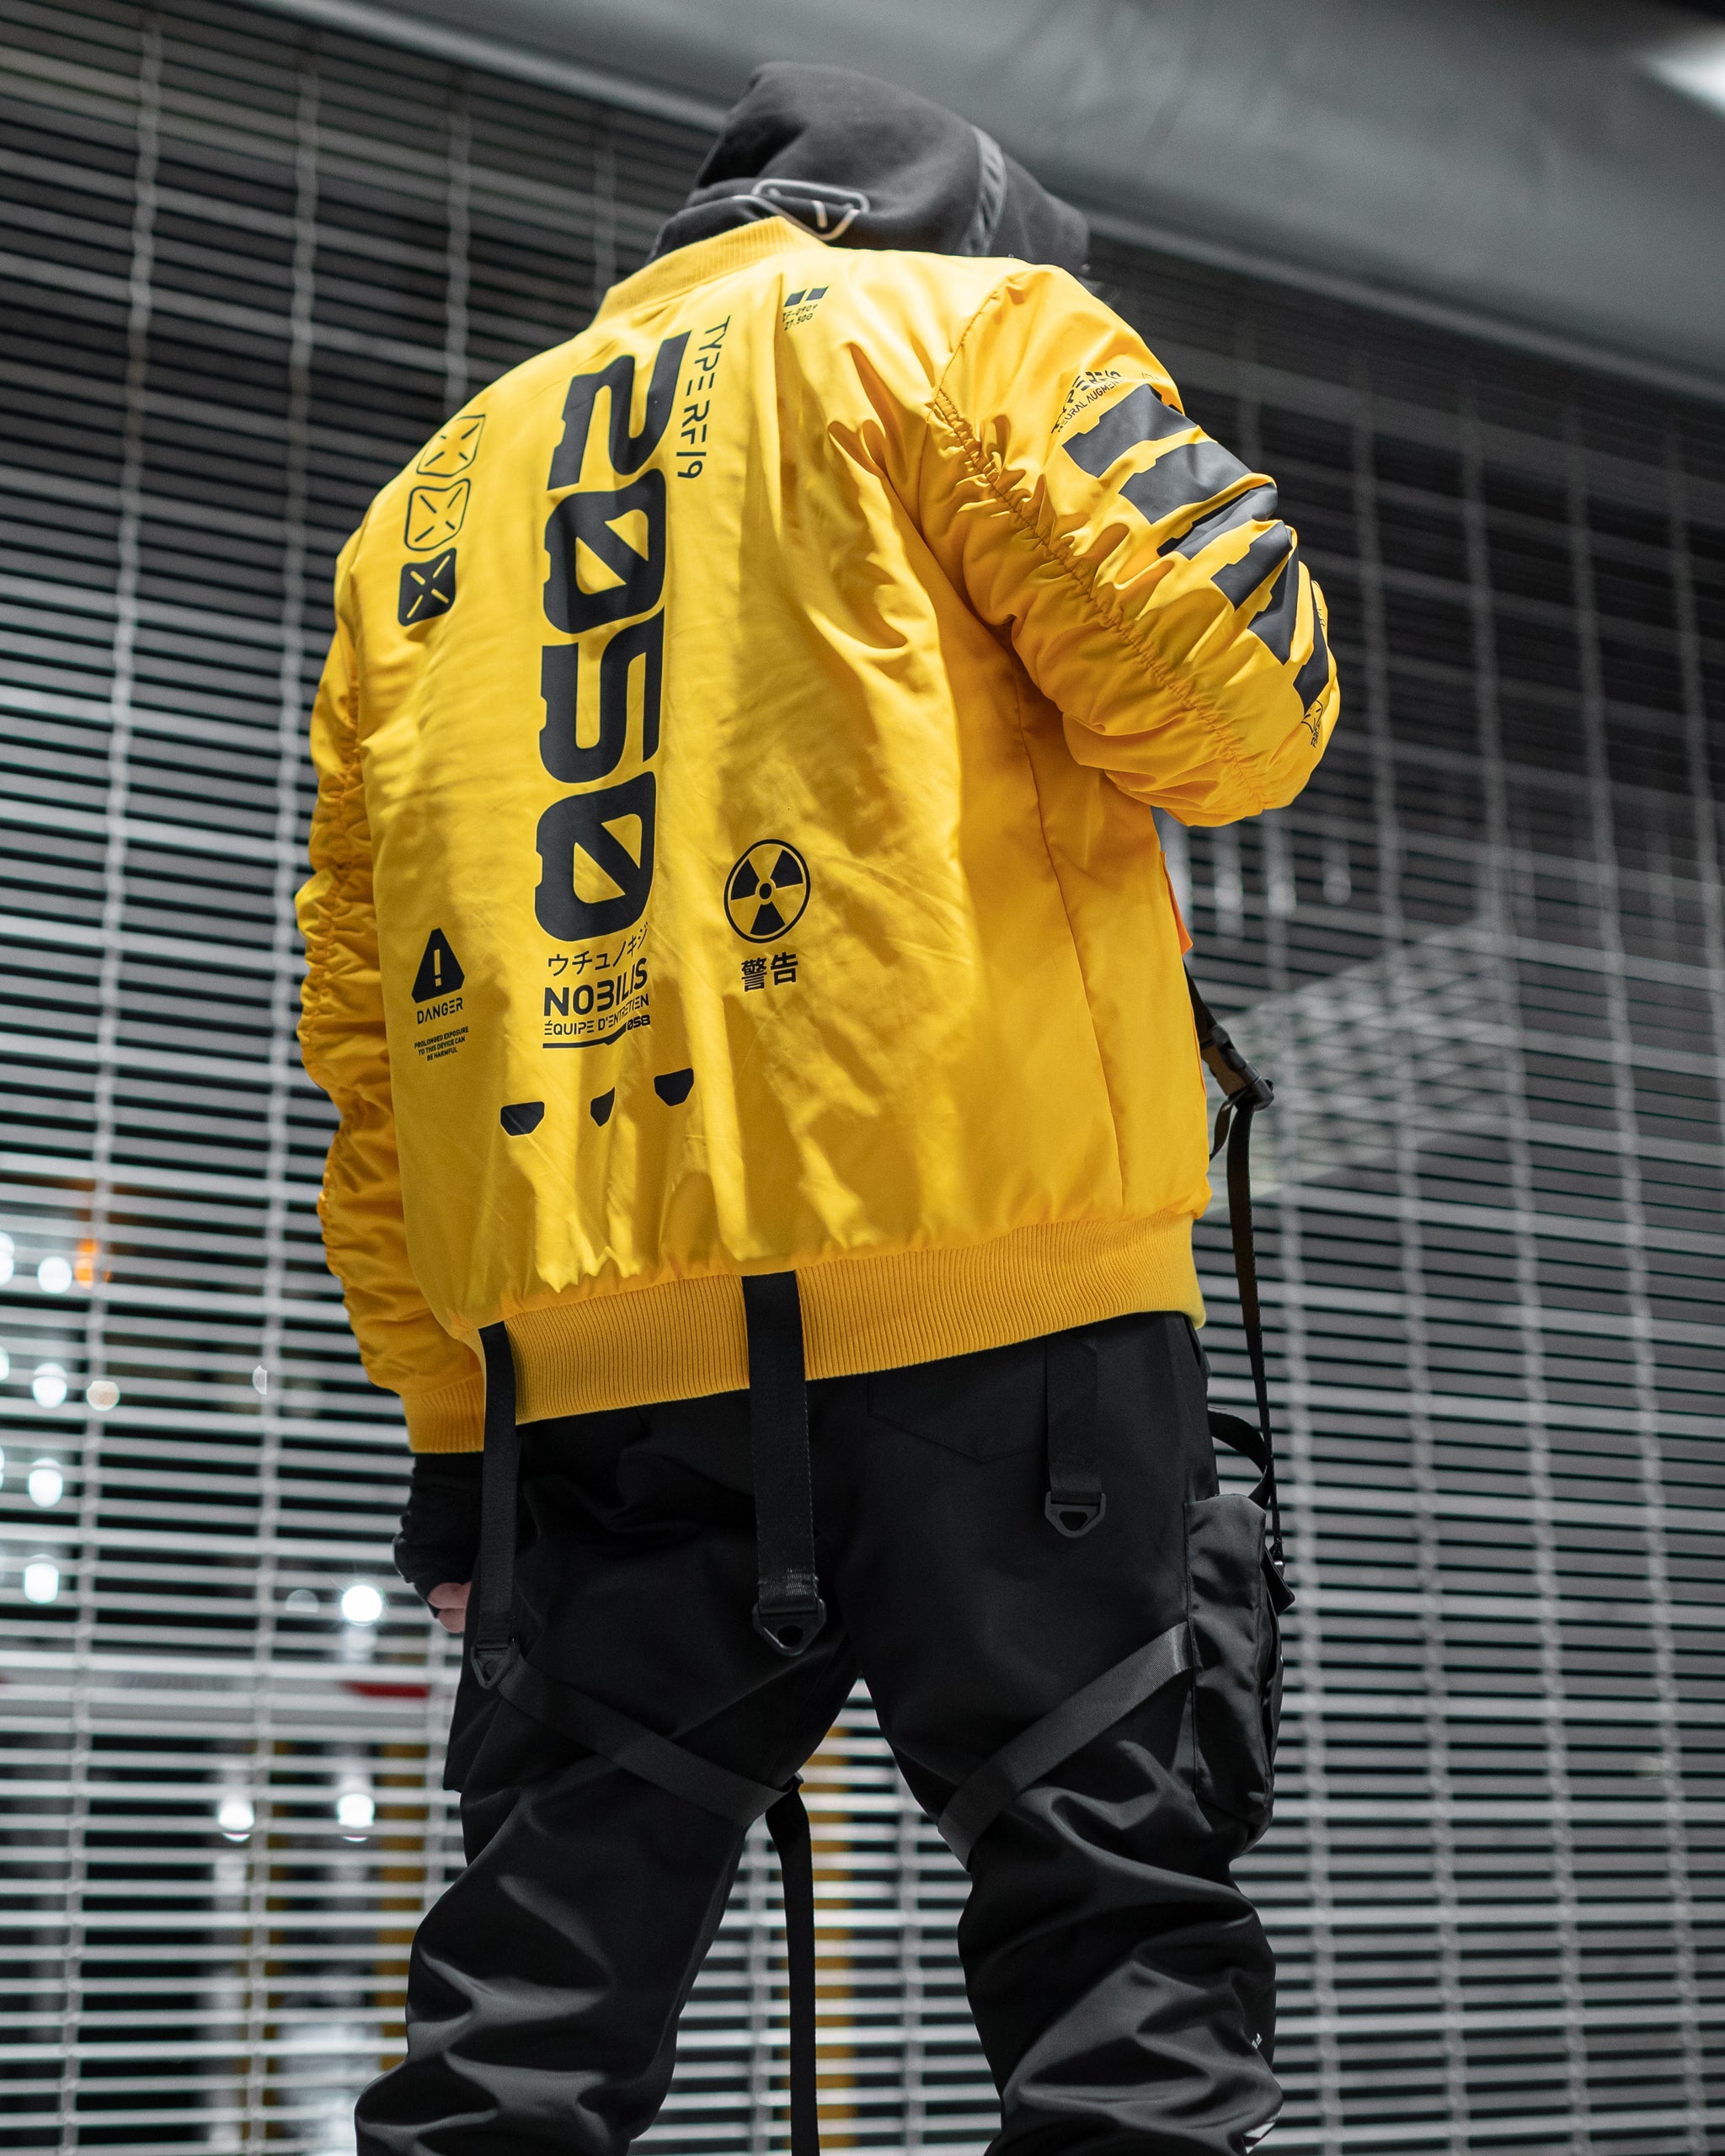 Y-2050 Gold Bomber Jacket - Fabric of the Universe